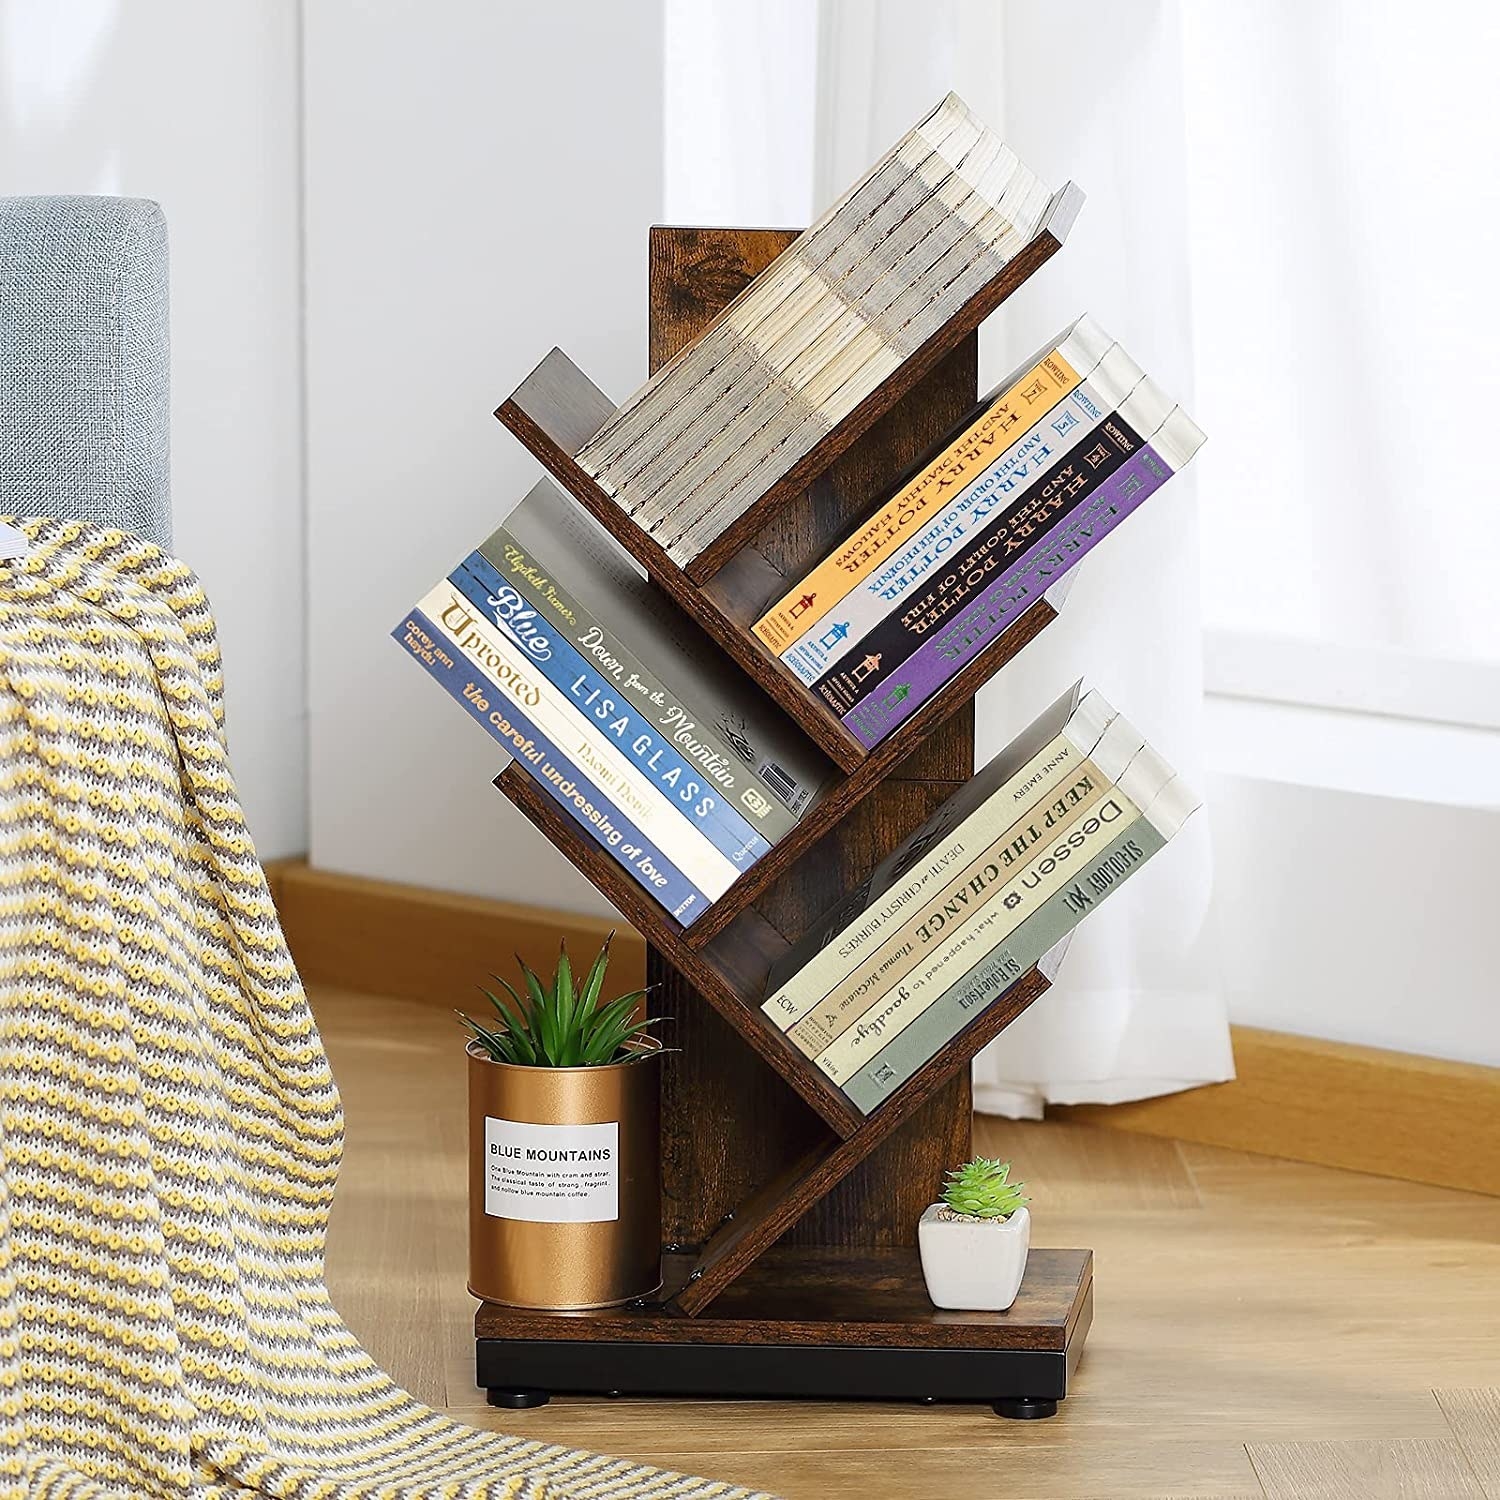 The bookshelf on the floor with books and plants on it